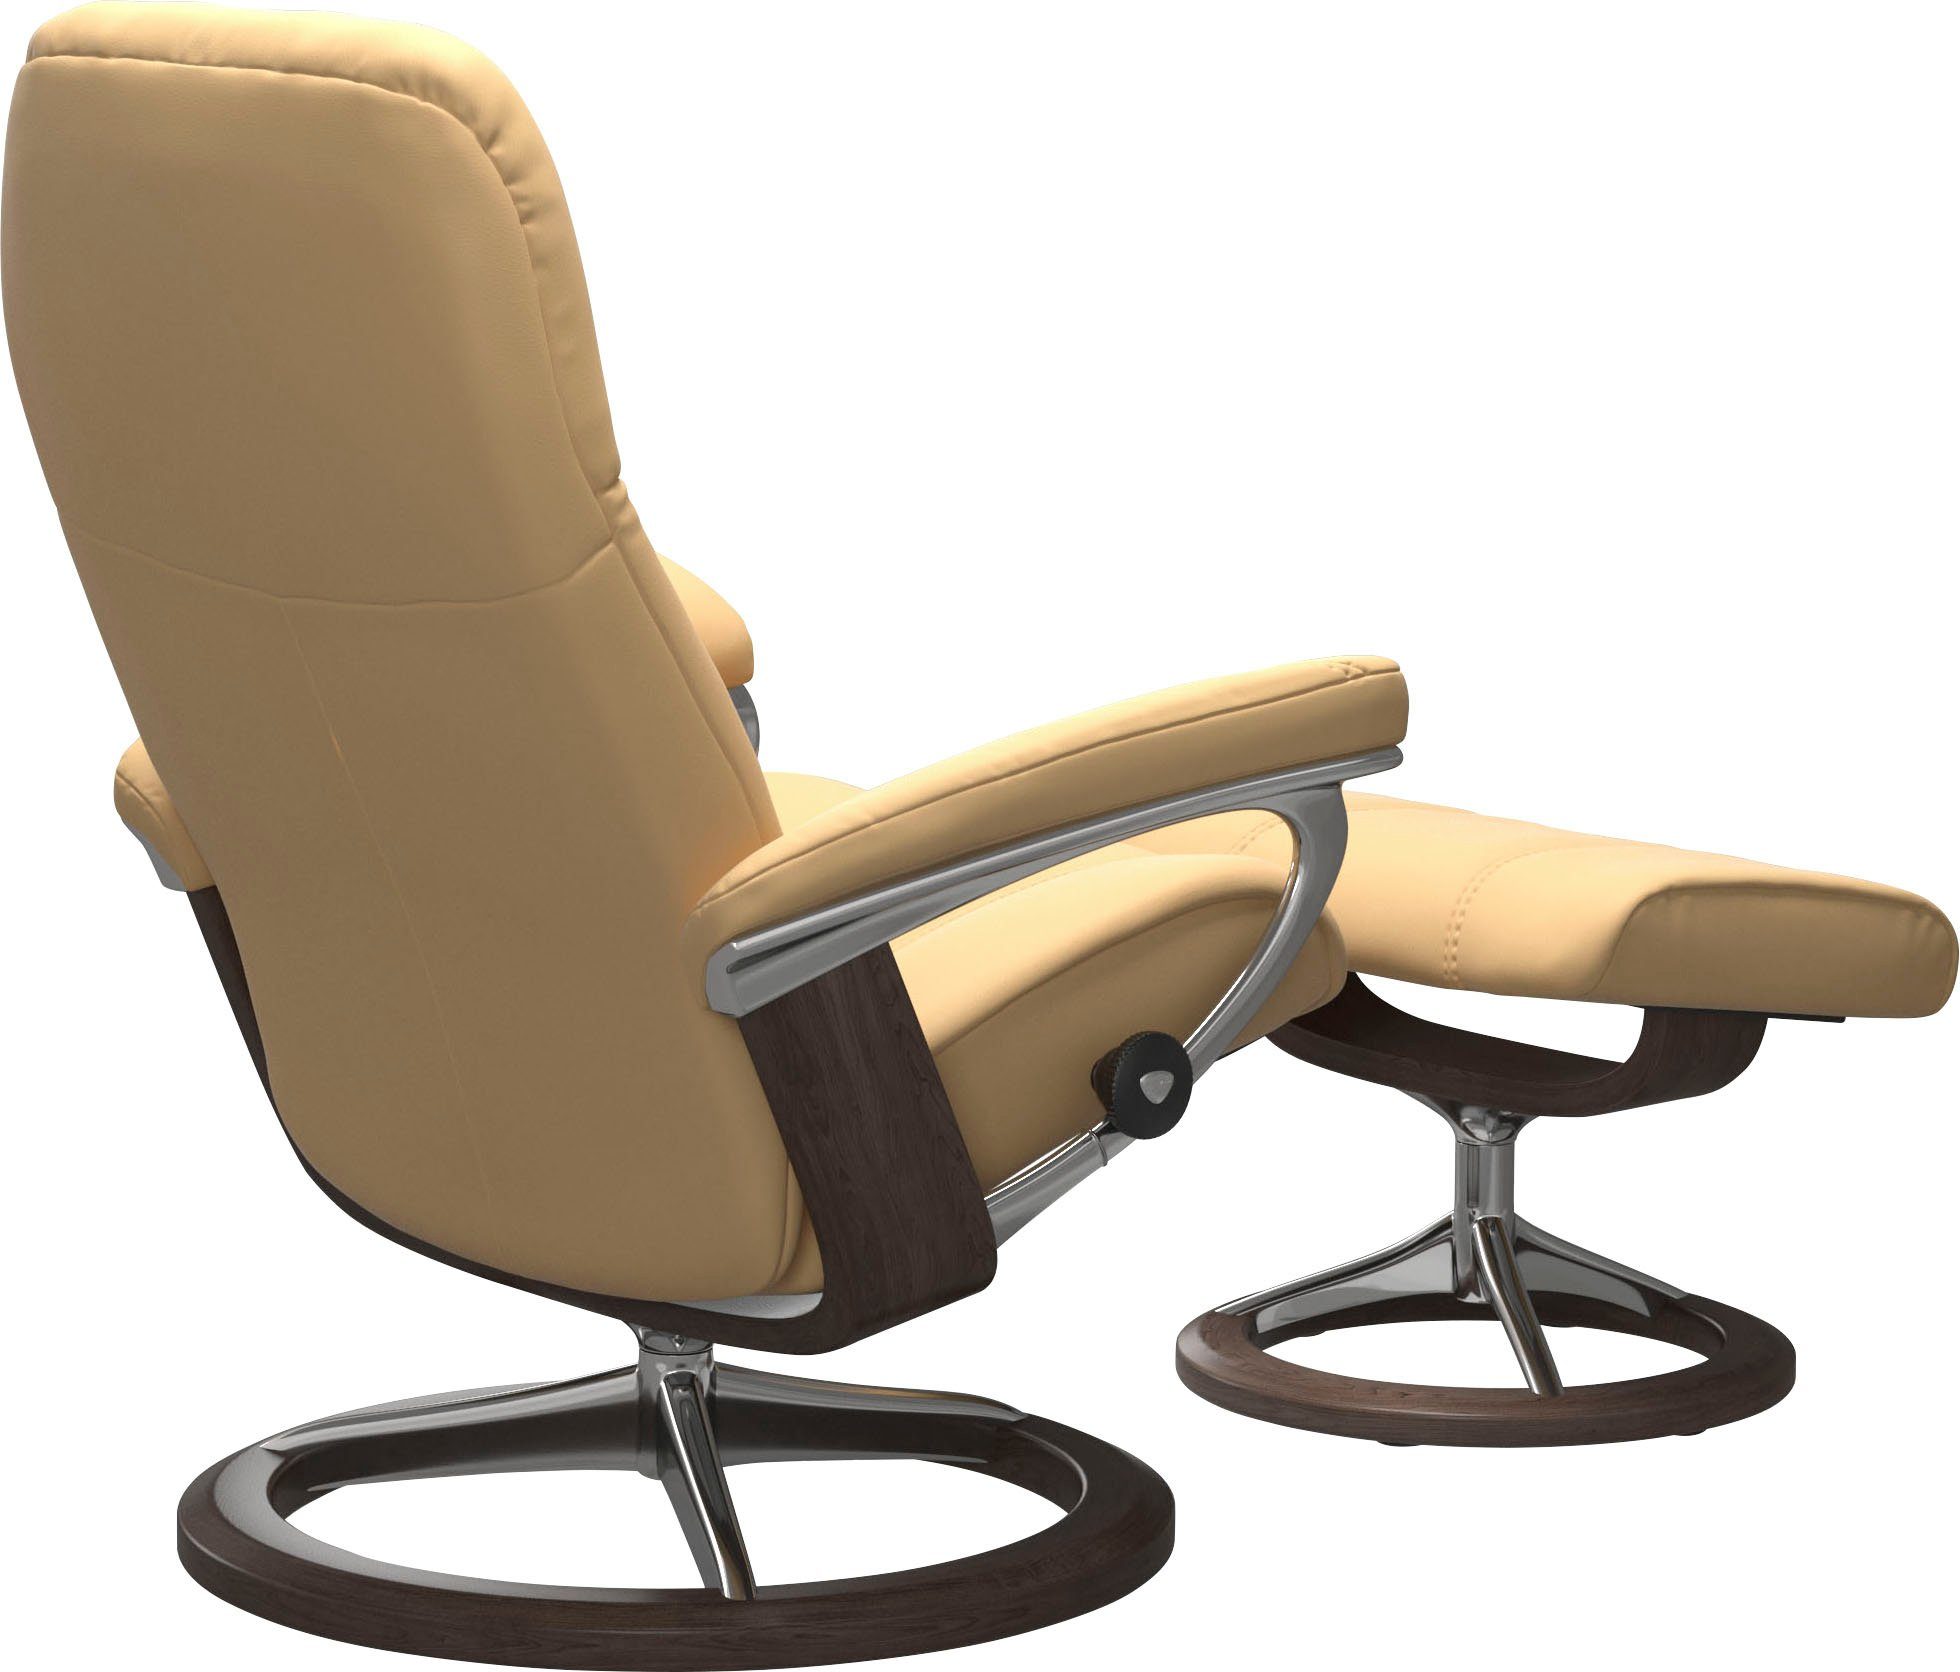 Wenge Consul, Größe L, mit Relaxsessel Stressless® Signature Gestell Base,